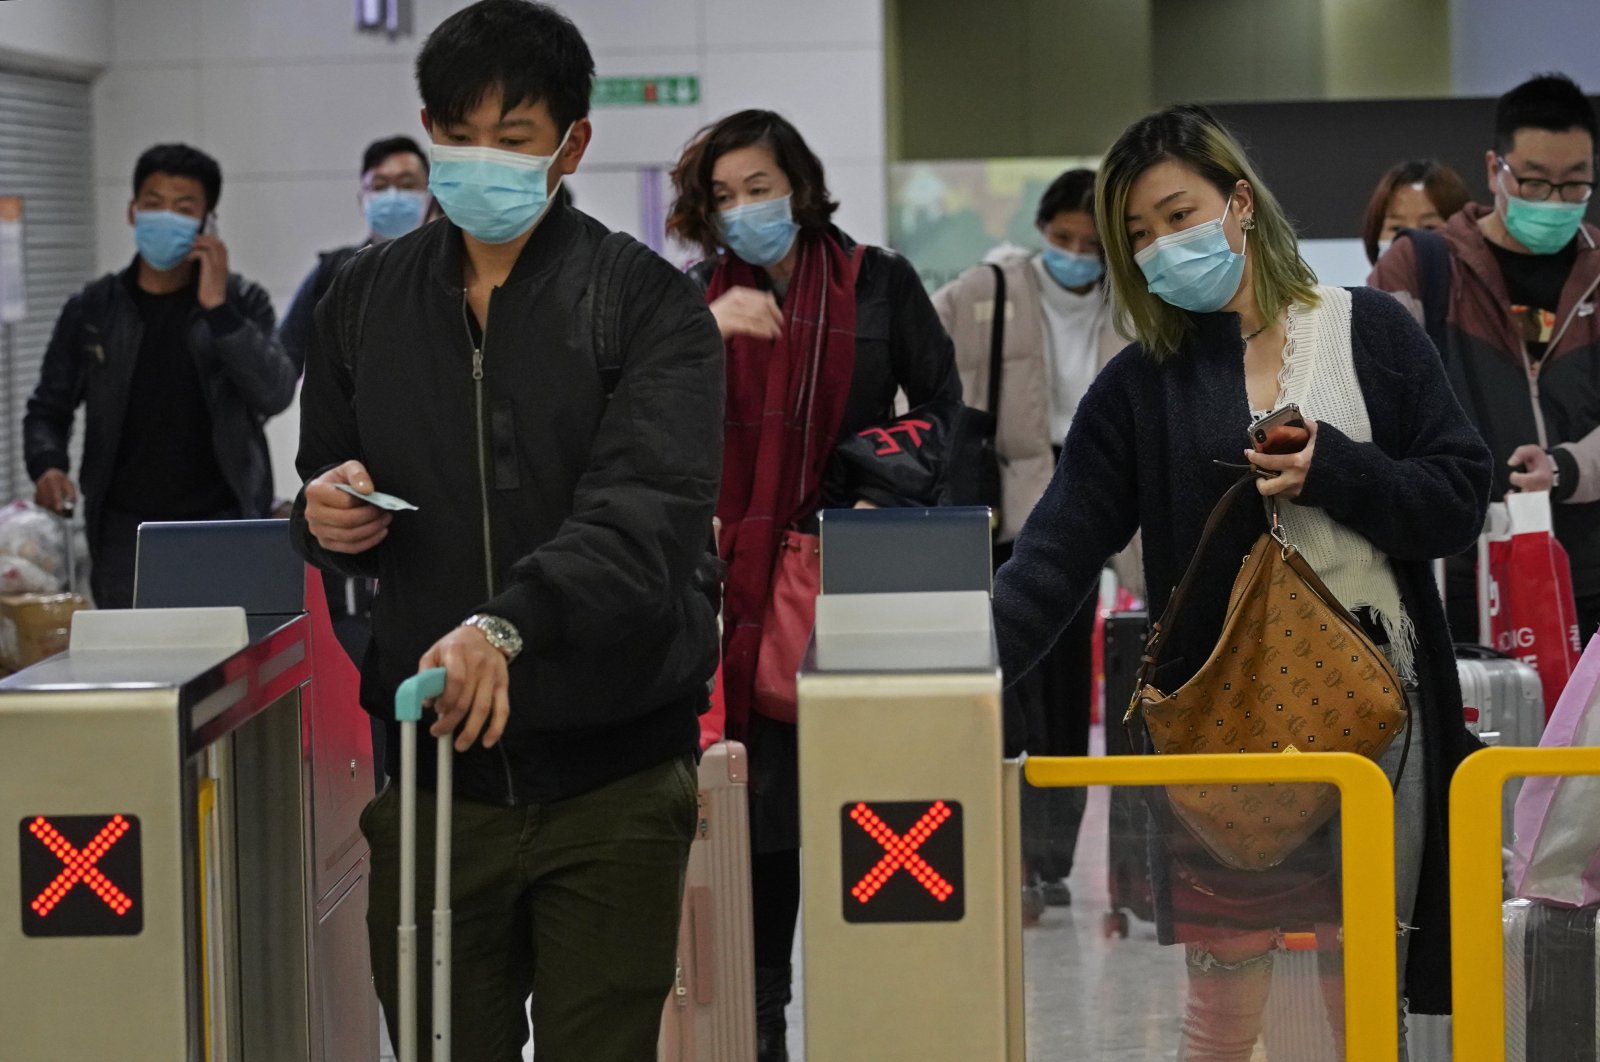 Passengers wearing protective face masks arrive at a high speed train station in Hong Kong, Jan. 28, 2020. (AP Photo)